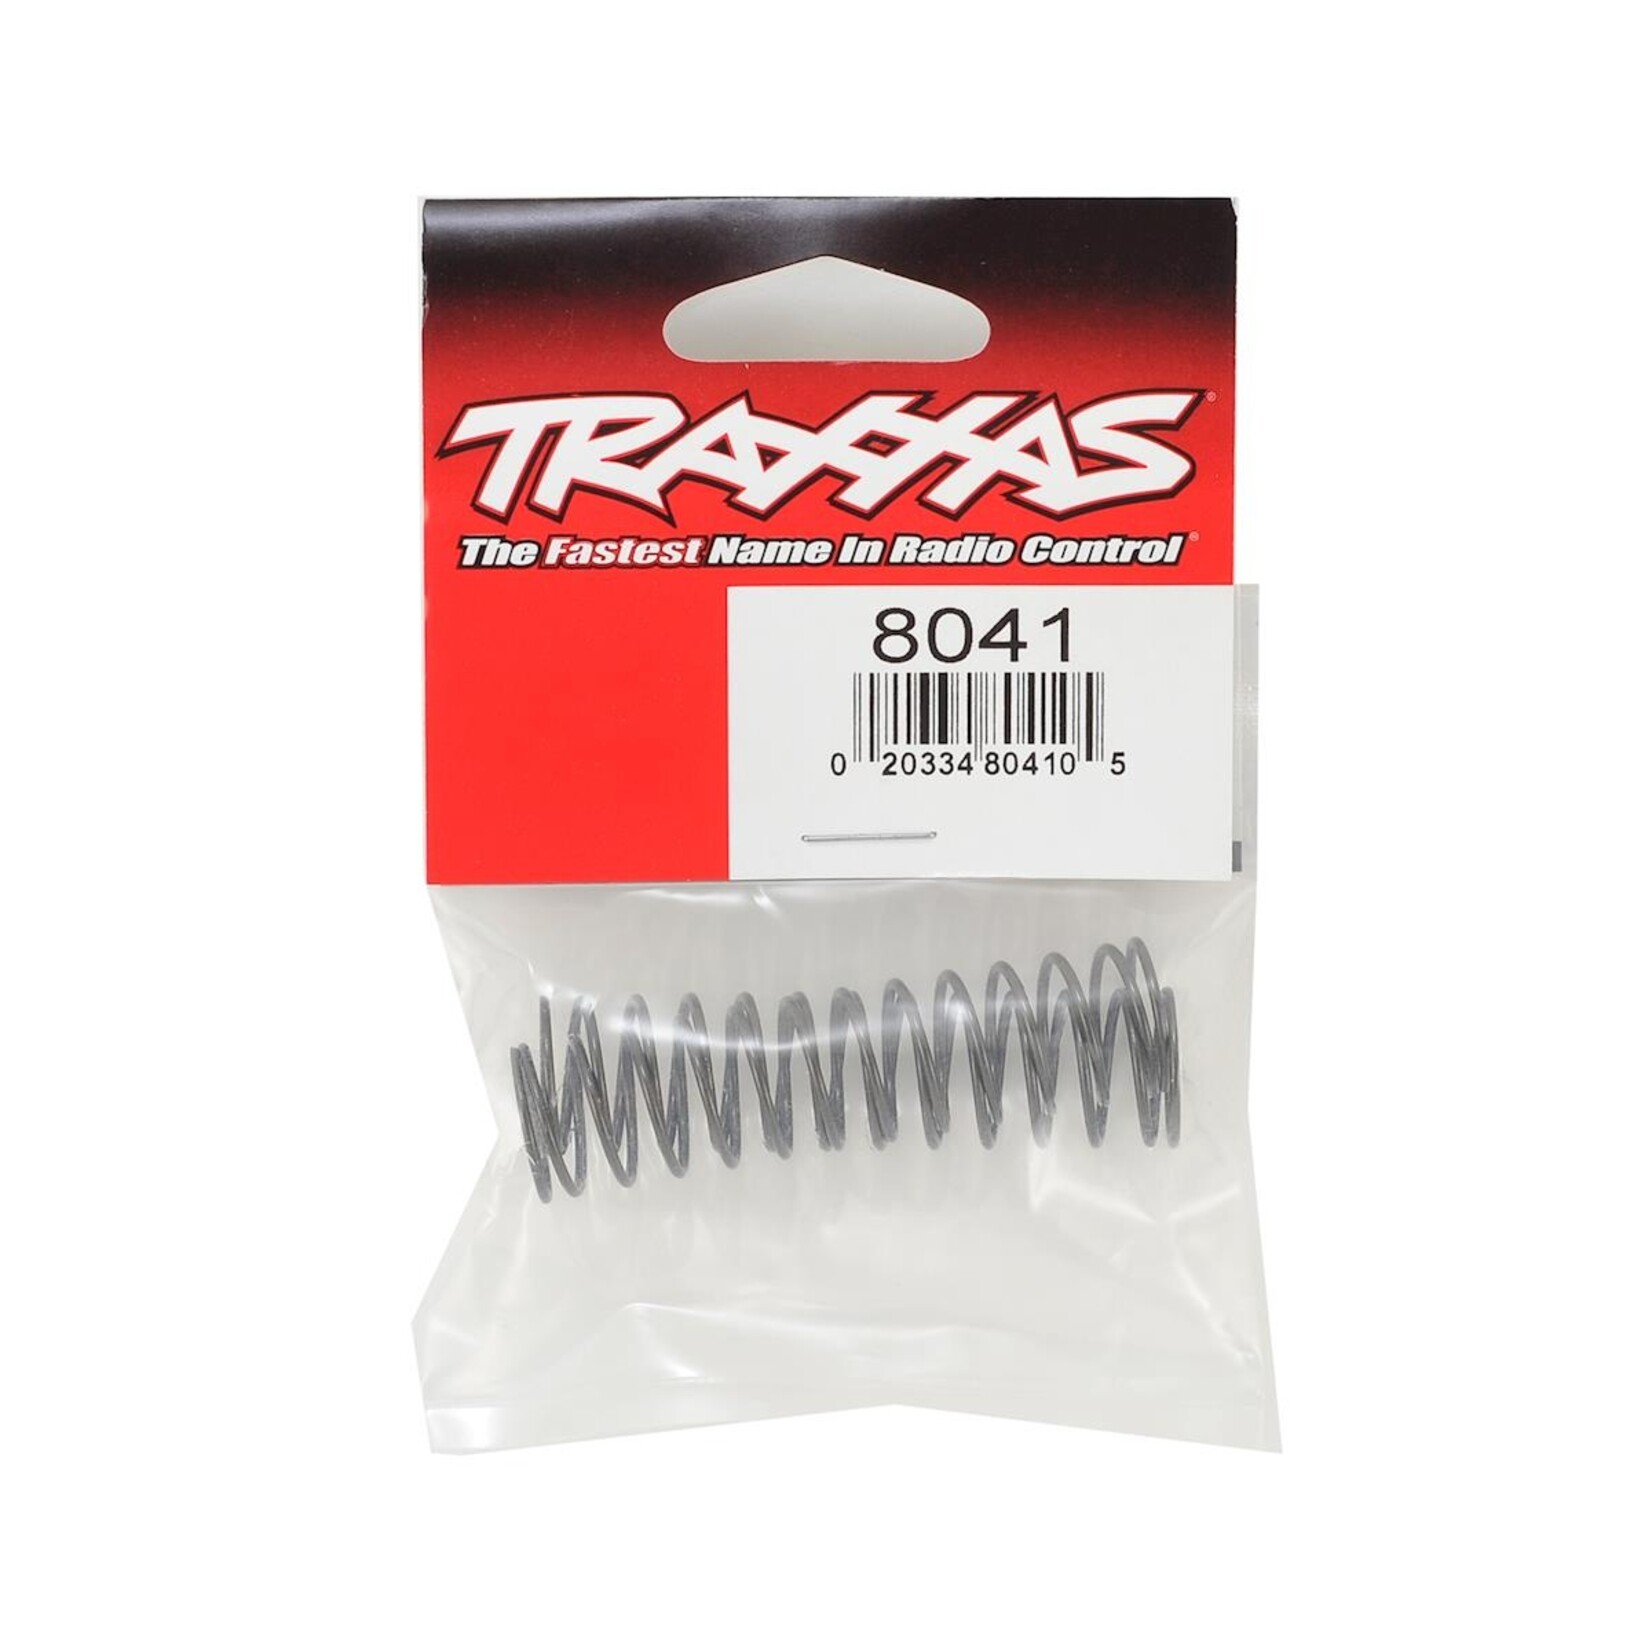 Traxxas Traxxas TRX-4 Front Shock Spring (2) (0.45 Rate) #8041